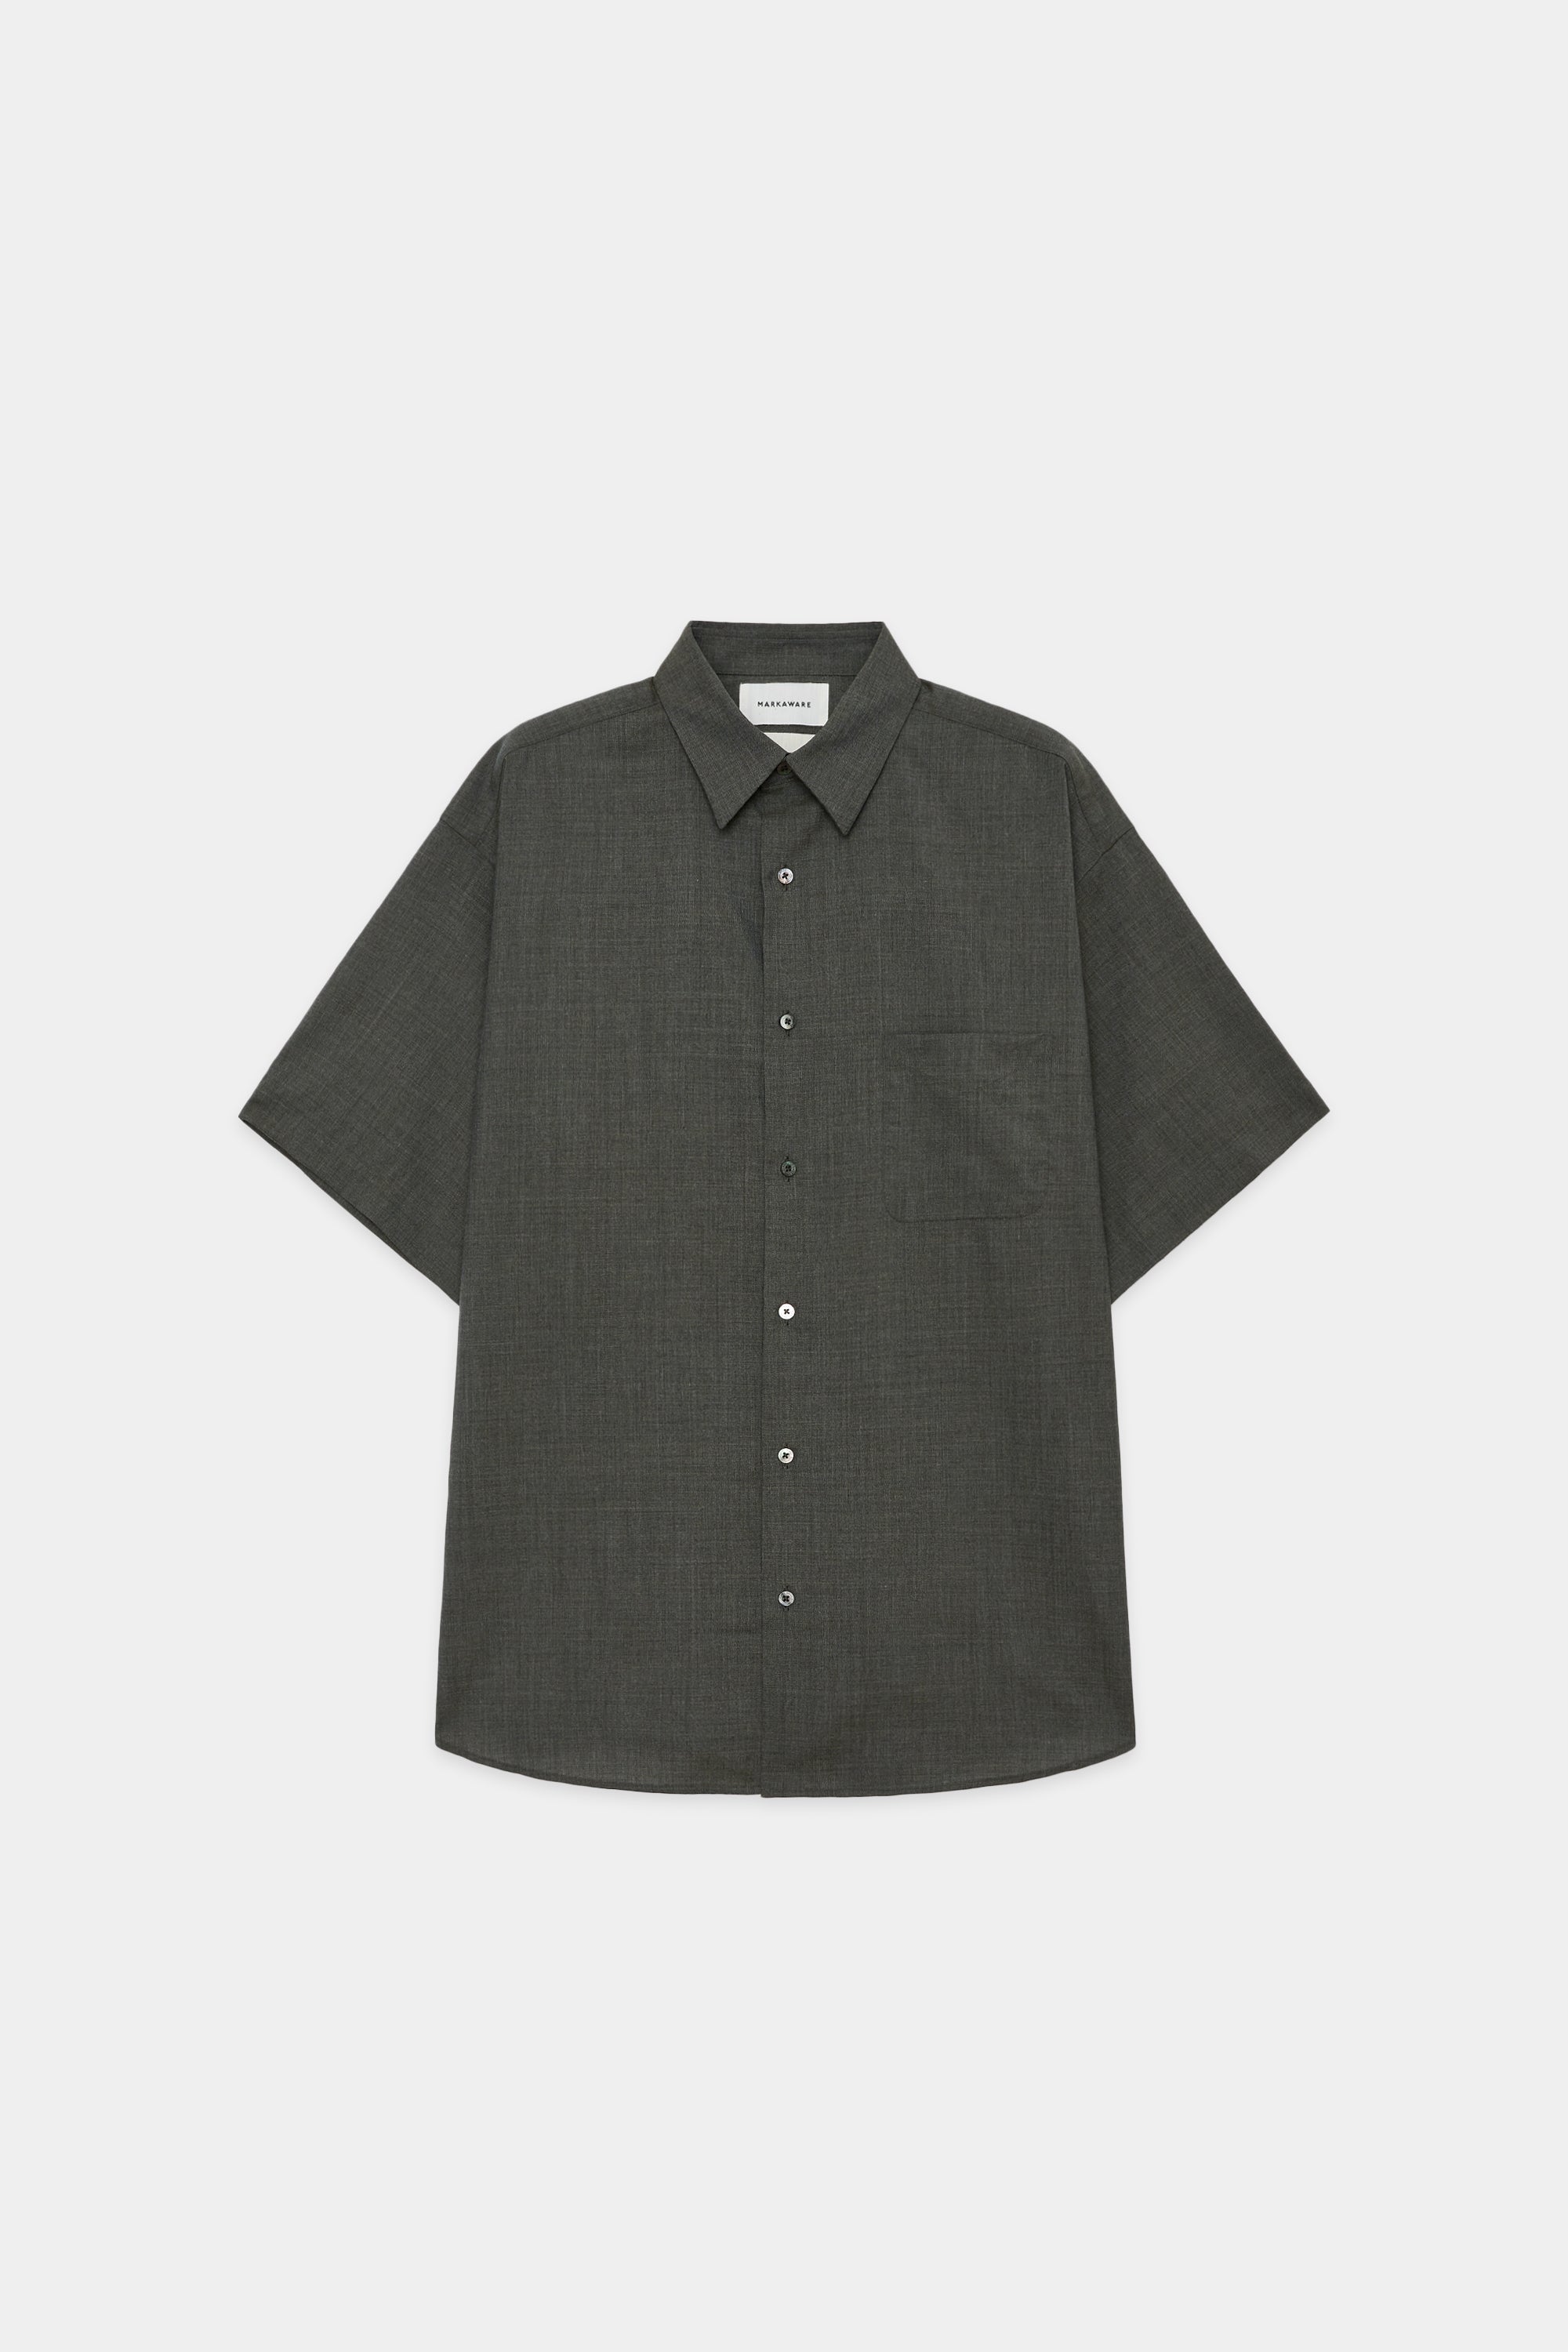 SUPER 120'S WOOL TROPICAL COMFORT FIT SHIRT S/S, Olive Gray